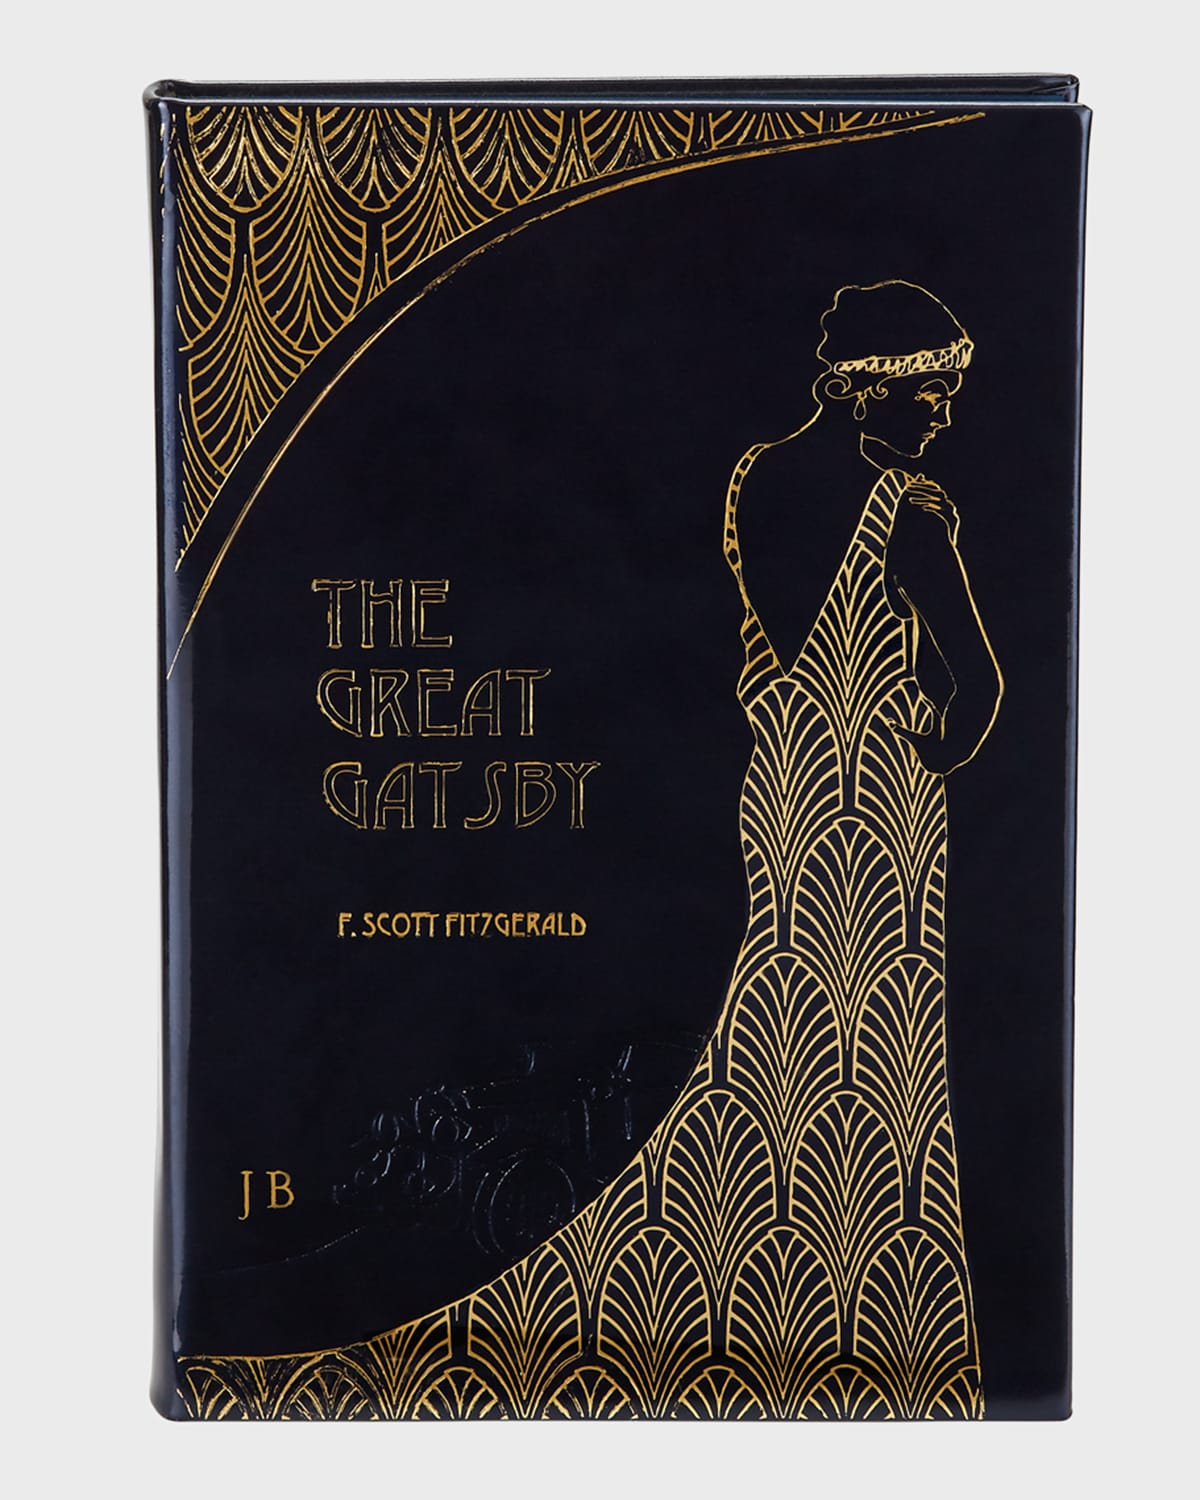 "The Great Gatsby" Book by F. Scott Fitzgerald, Personalized